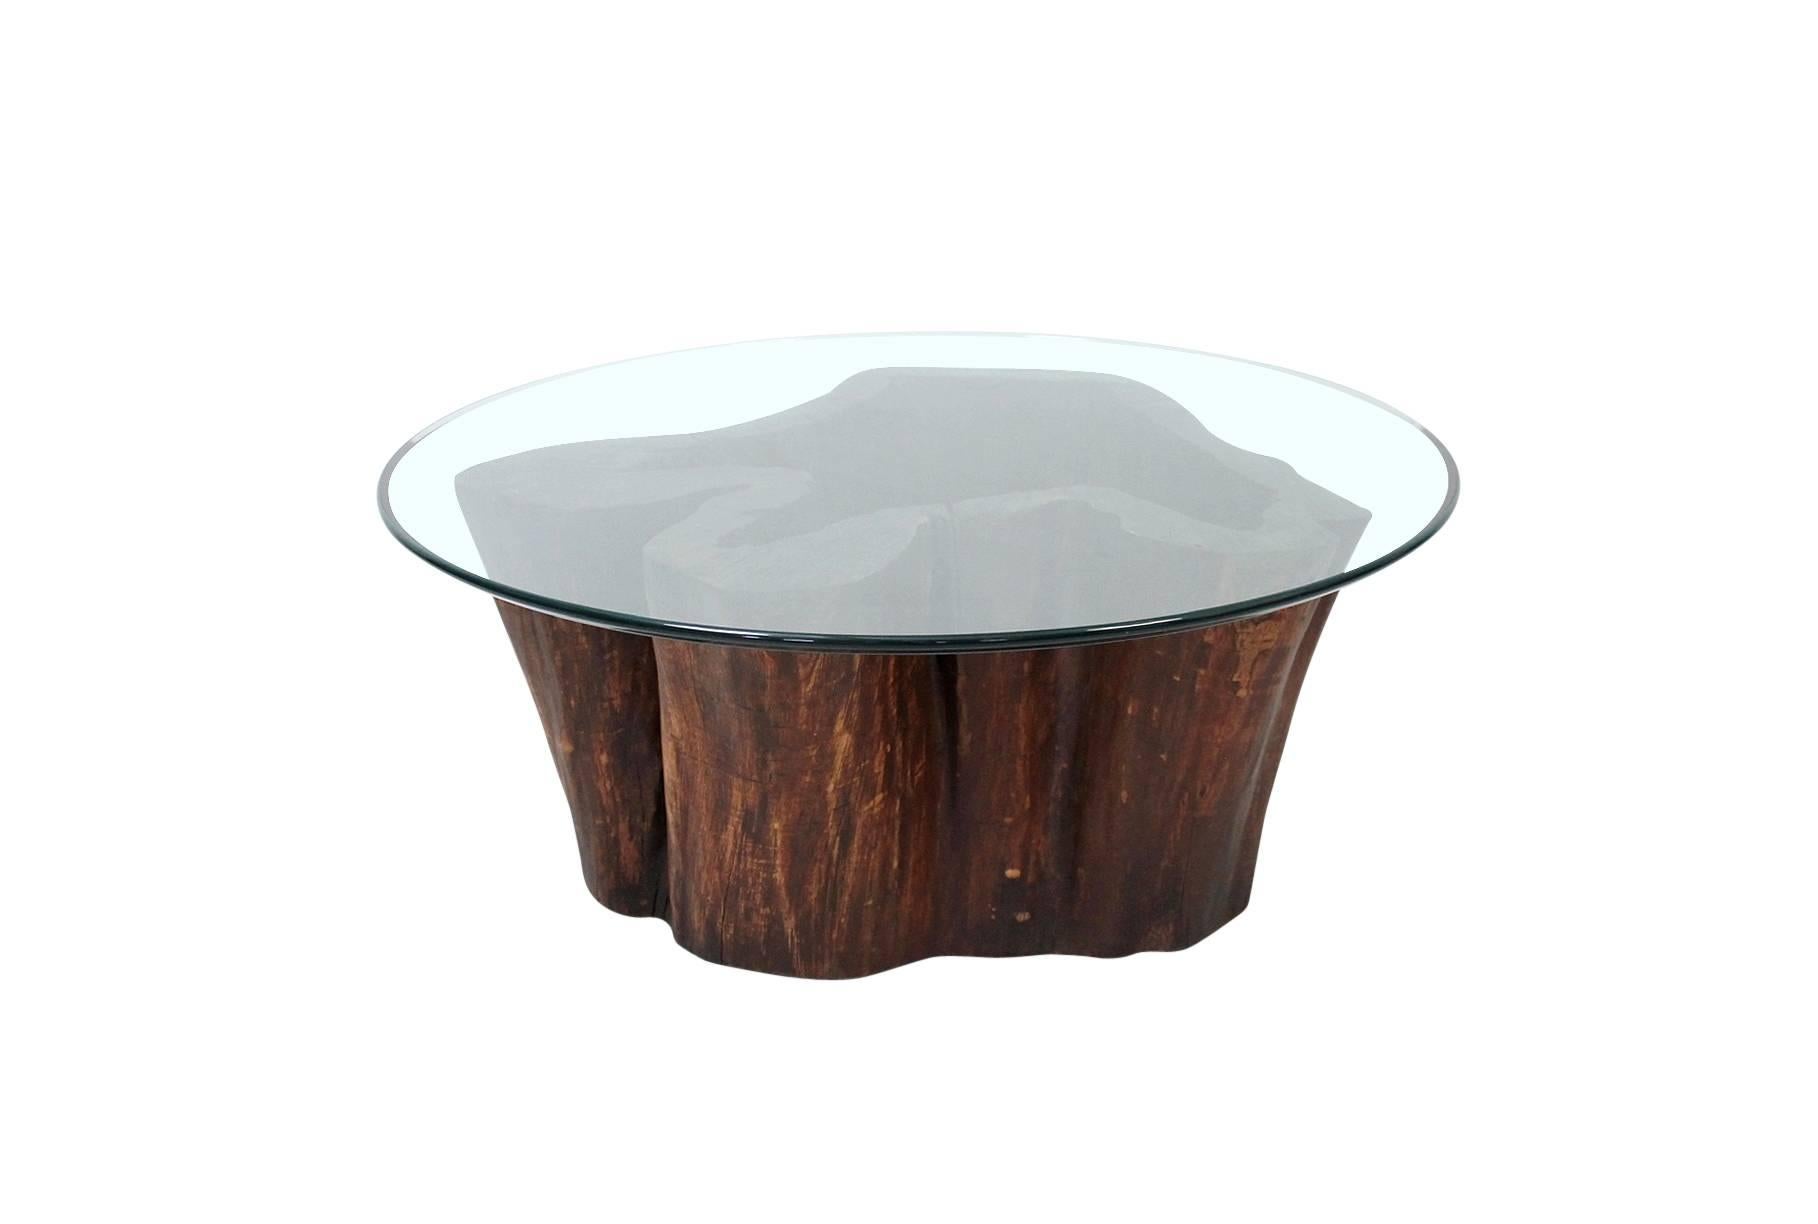 Vintage hollow stump coffee table with round glass top. Great biomorphic and graphic shape. Reminiscent of the 1970s work of famed Brazilian designer José Zanine Caldas. Current top is a 40